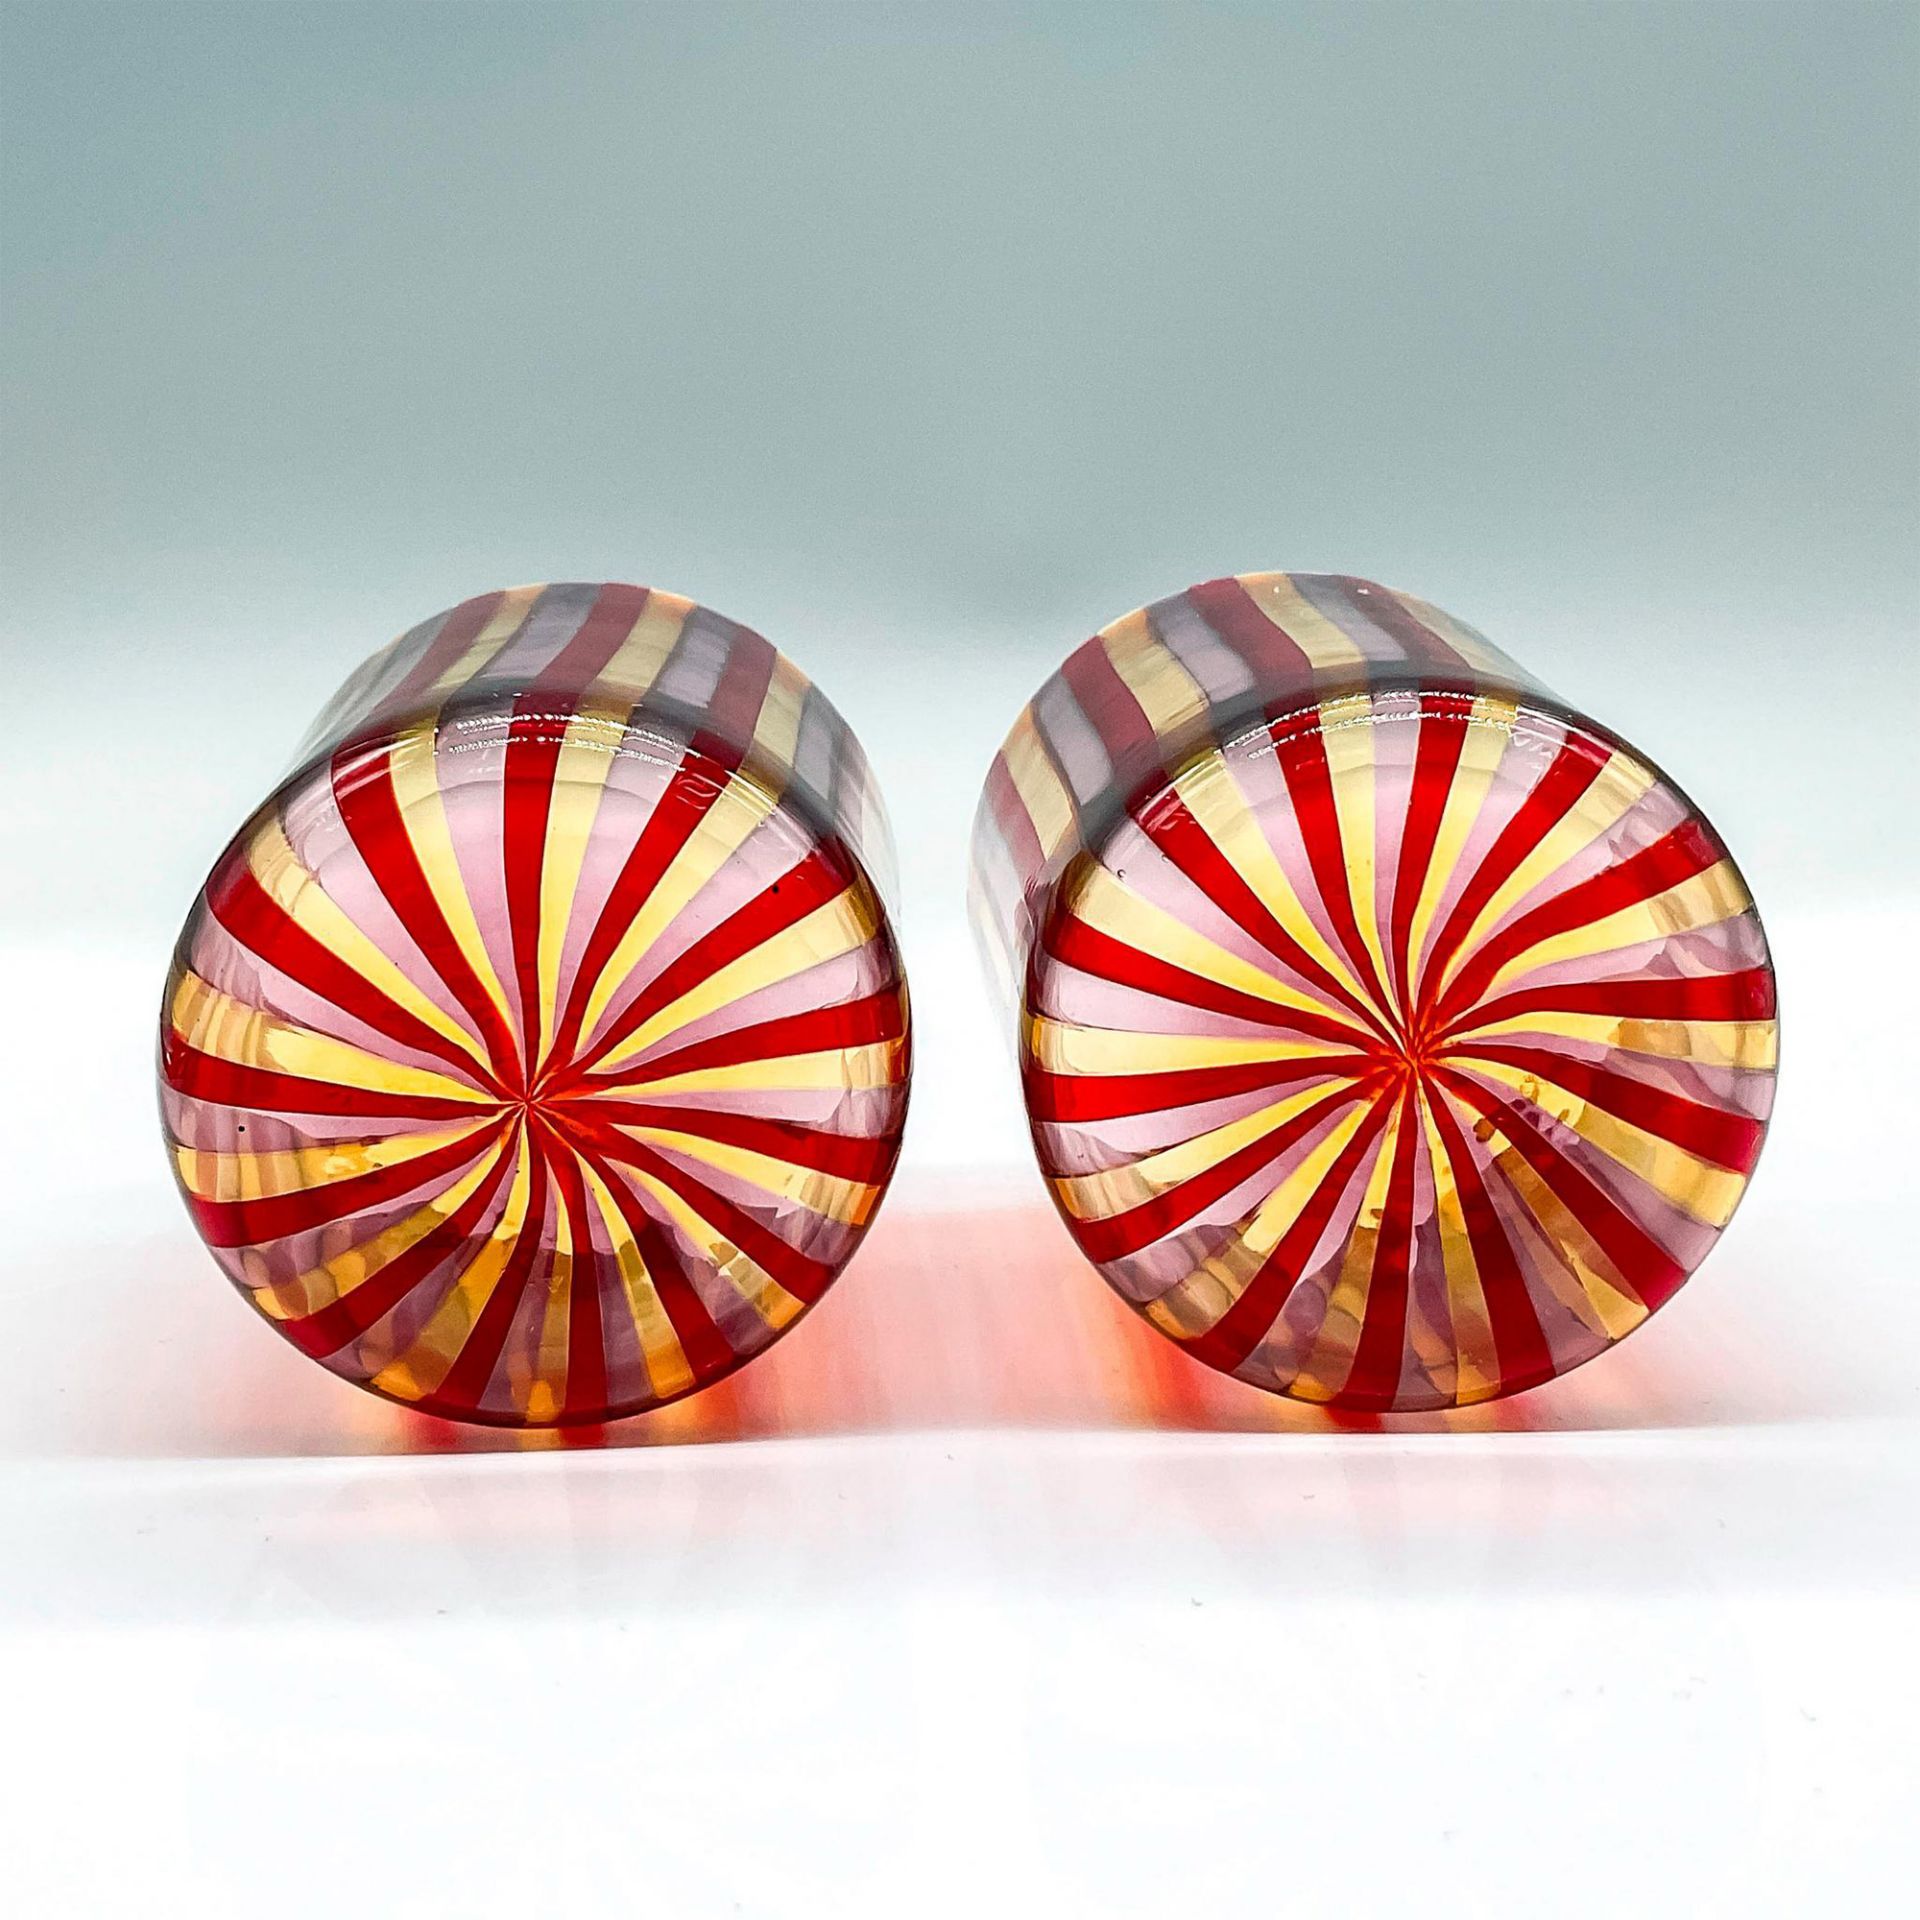 2pc Murano Colorful Striped Drinking Glasses - Image 3 of 3